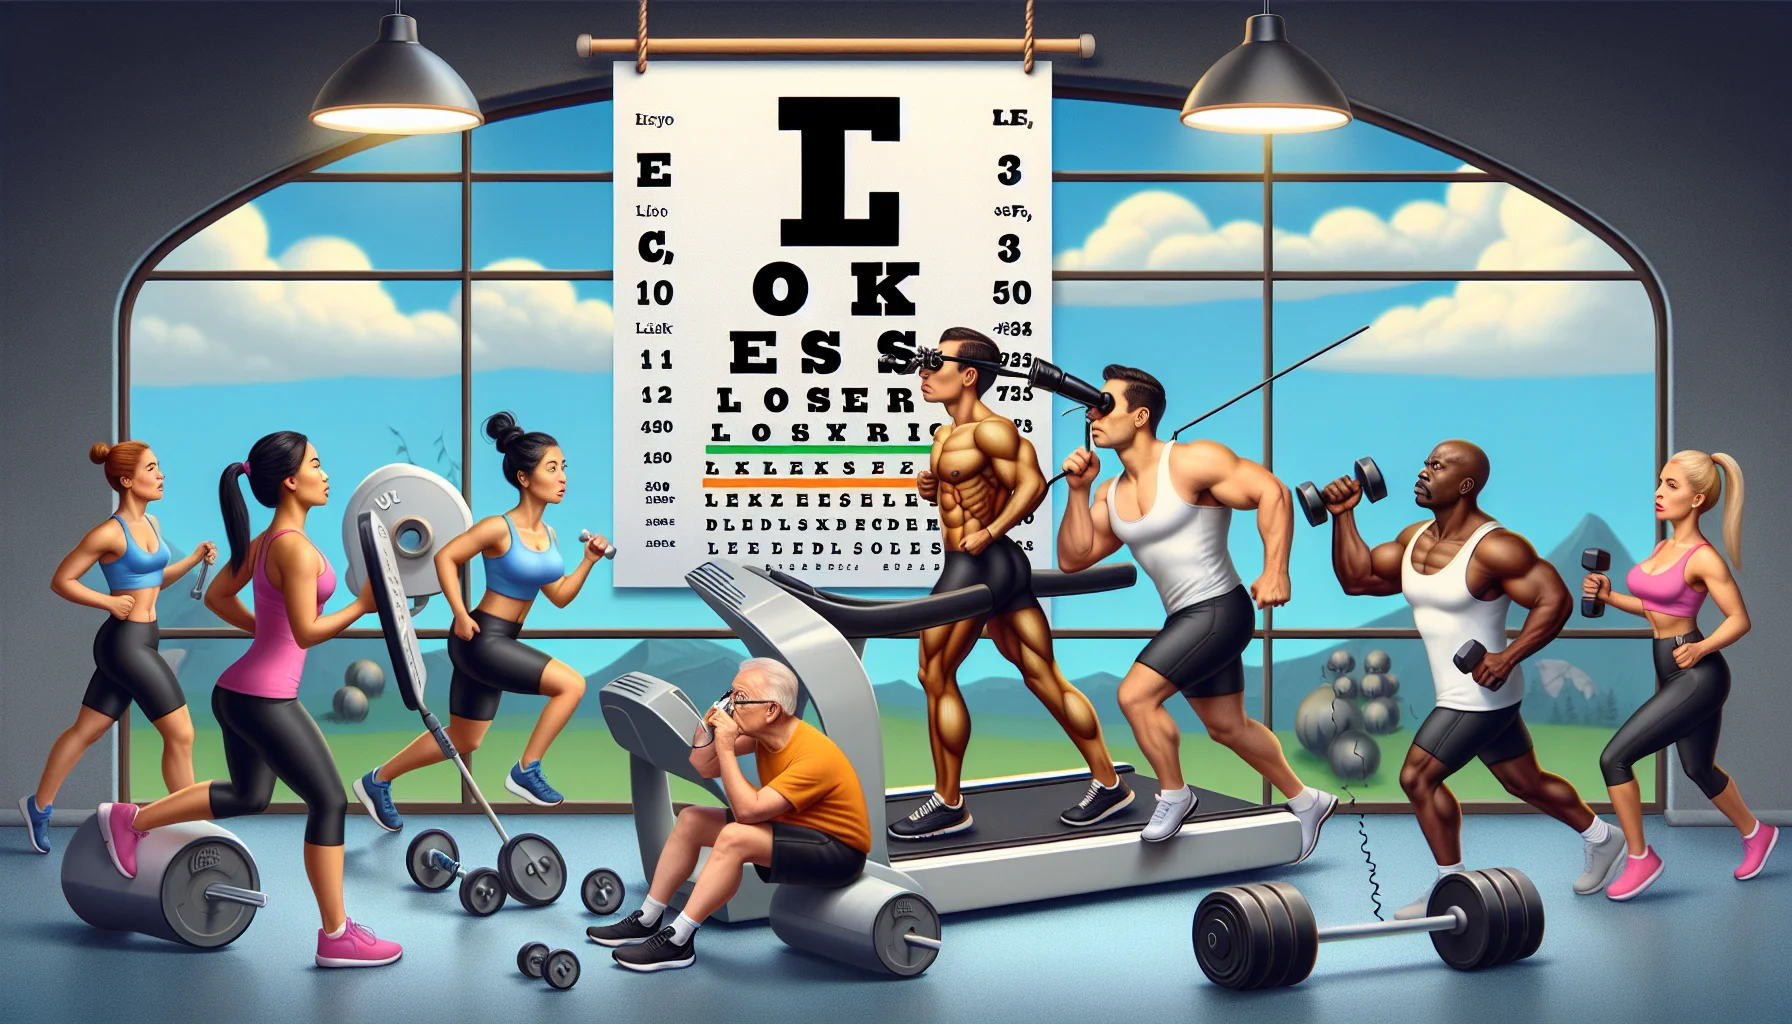 Create a humorous portrayal of 'Understanding LASIK Eye Surgery Costs.' Imagine a surreal gym setting where the eye chart acts as motivational posters encouraging people to exercise. A scene where diverse people of different genders and ethnicities, such as a Hispanic woman or an Asian man, perform various exercises; a Caucasian woman on the treadmill squints at the chart; a Black man lifts weights, trying to decipher the smaller letters. There is a sense of jest as everyone attempts to make sense of LASIK cost information disguised as workout regimens.